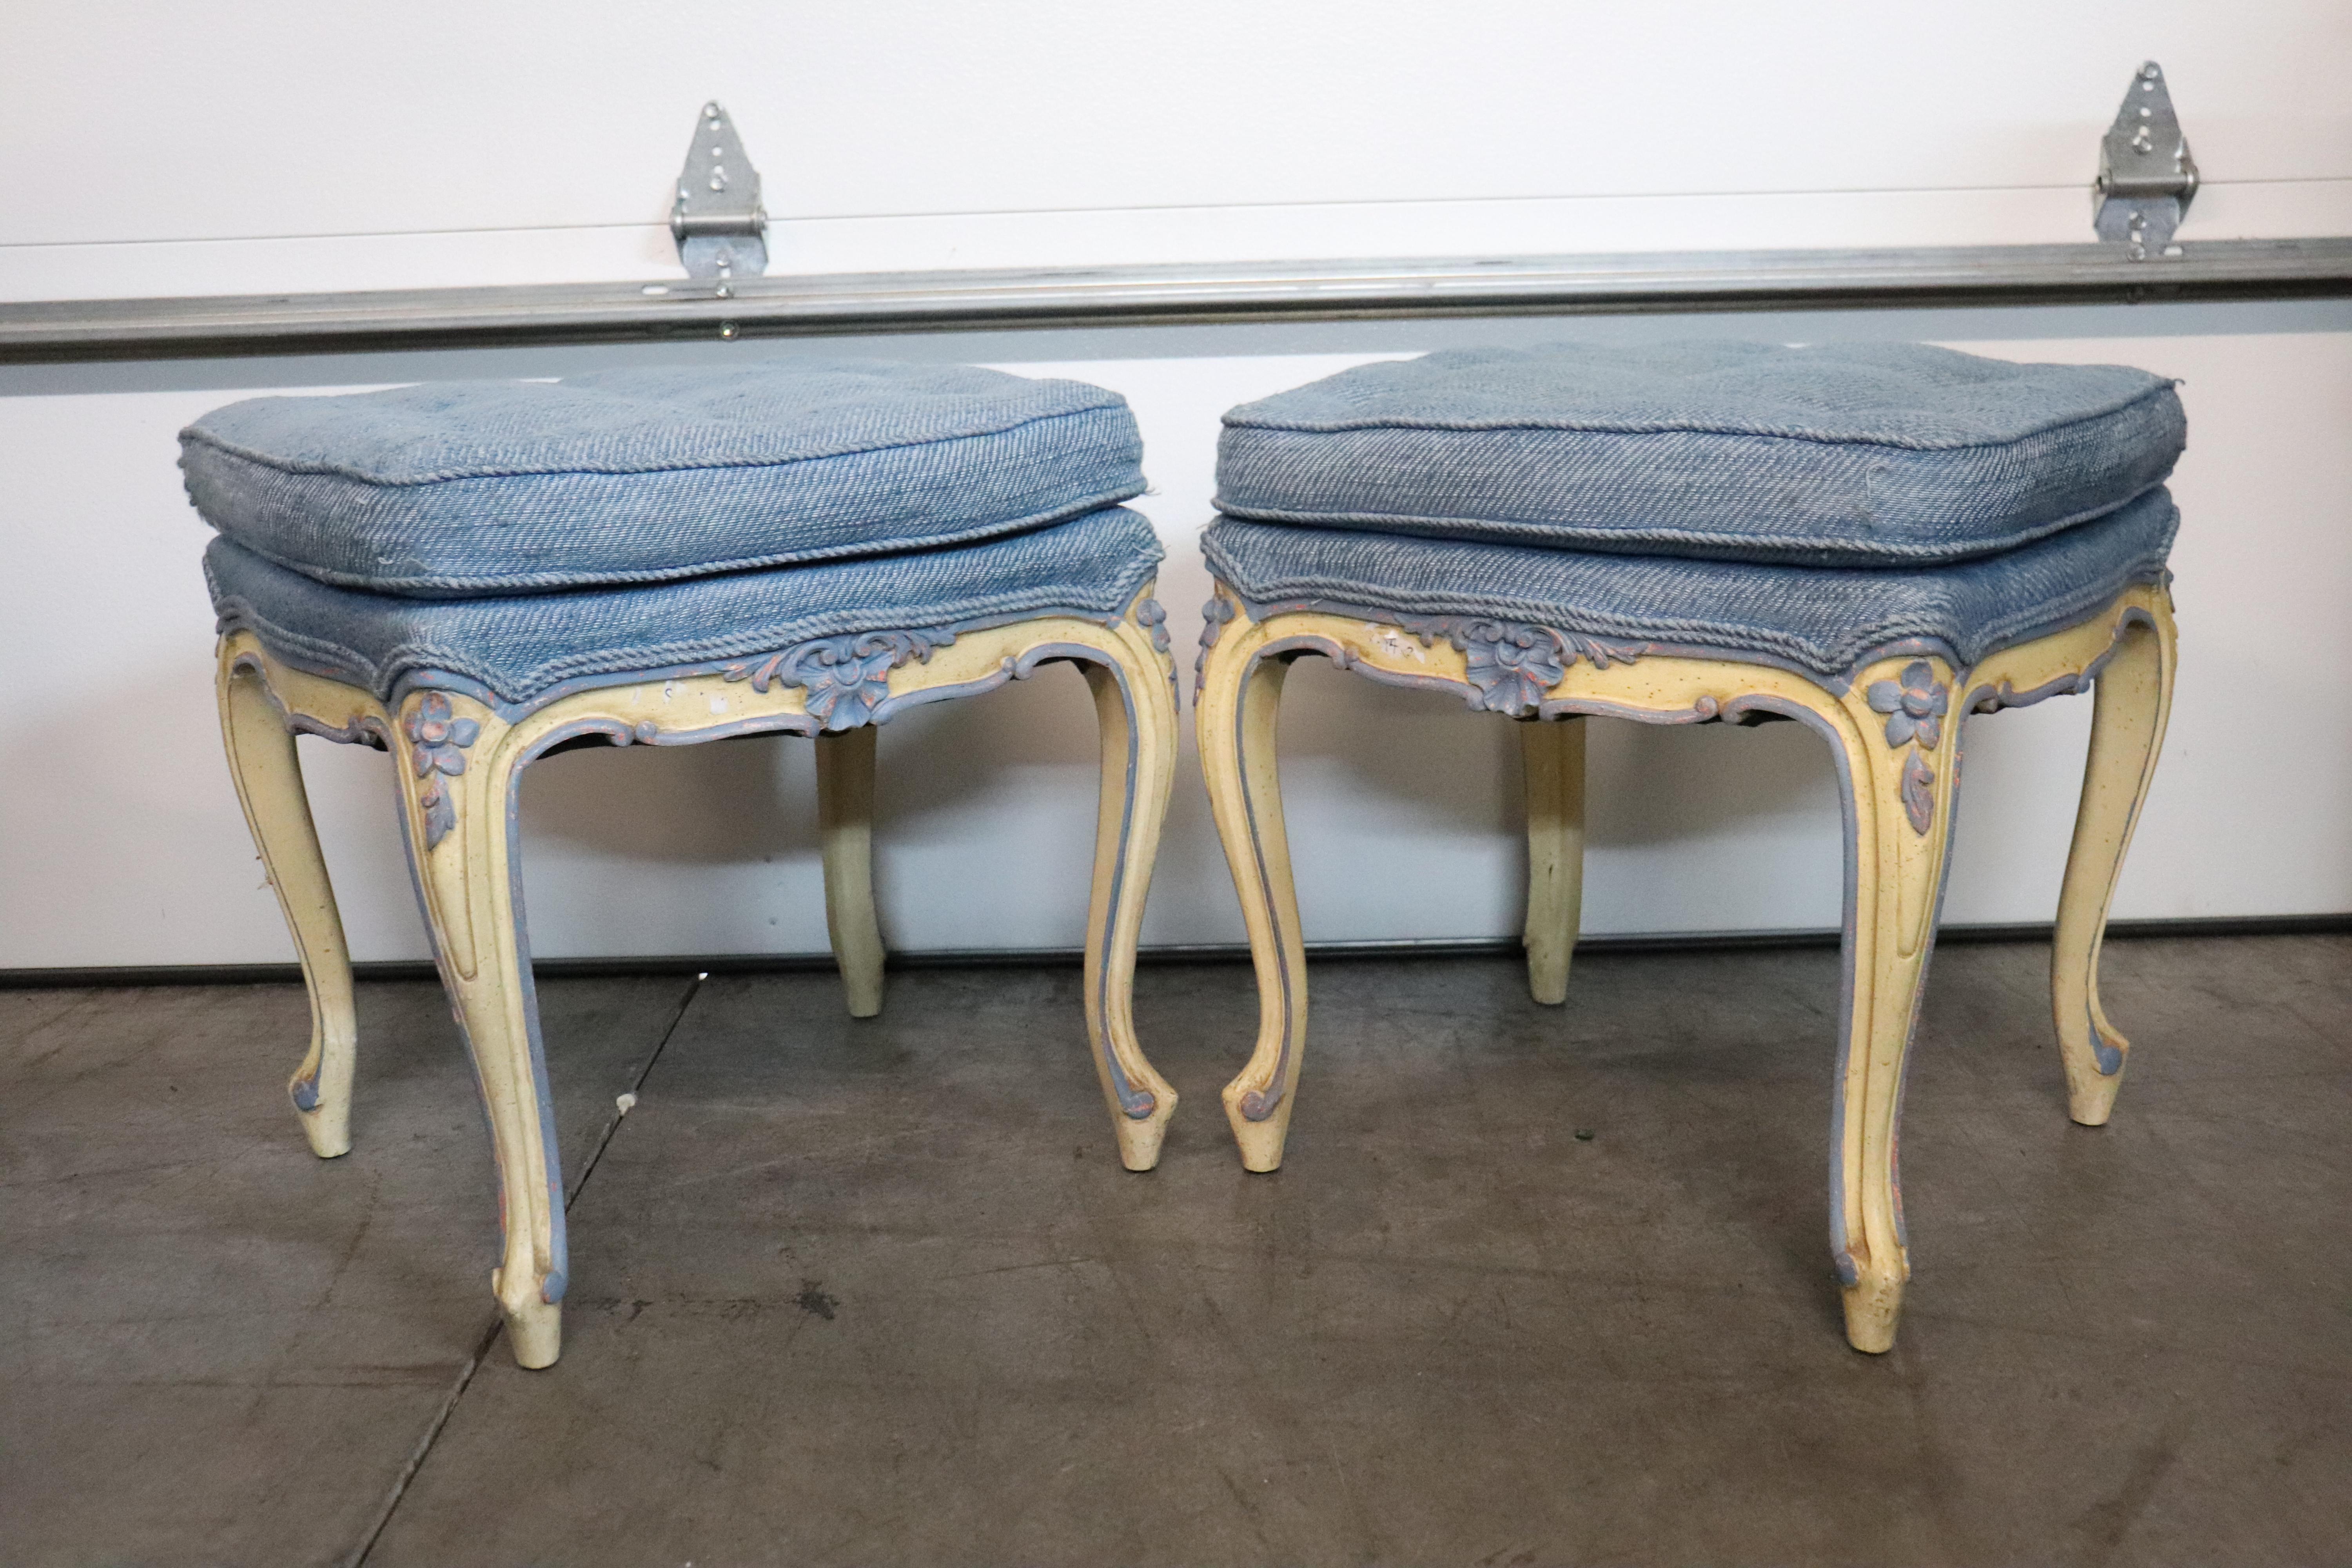 This is a beautiful pair of American-made French style stools in a beautiful blue with matching blue accents. The stools are in good condition and measure 20.5 x 20.5 x 19 inches tall and date to the 1940s era.